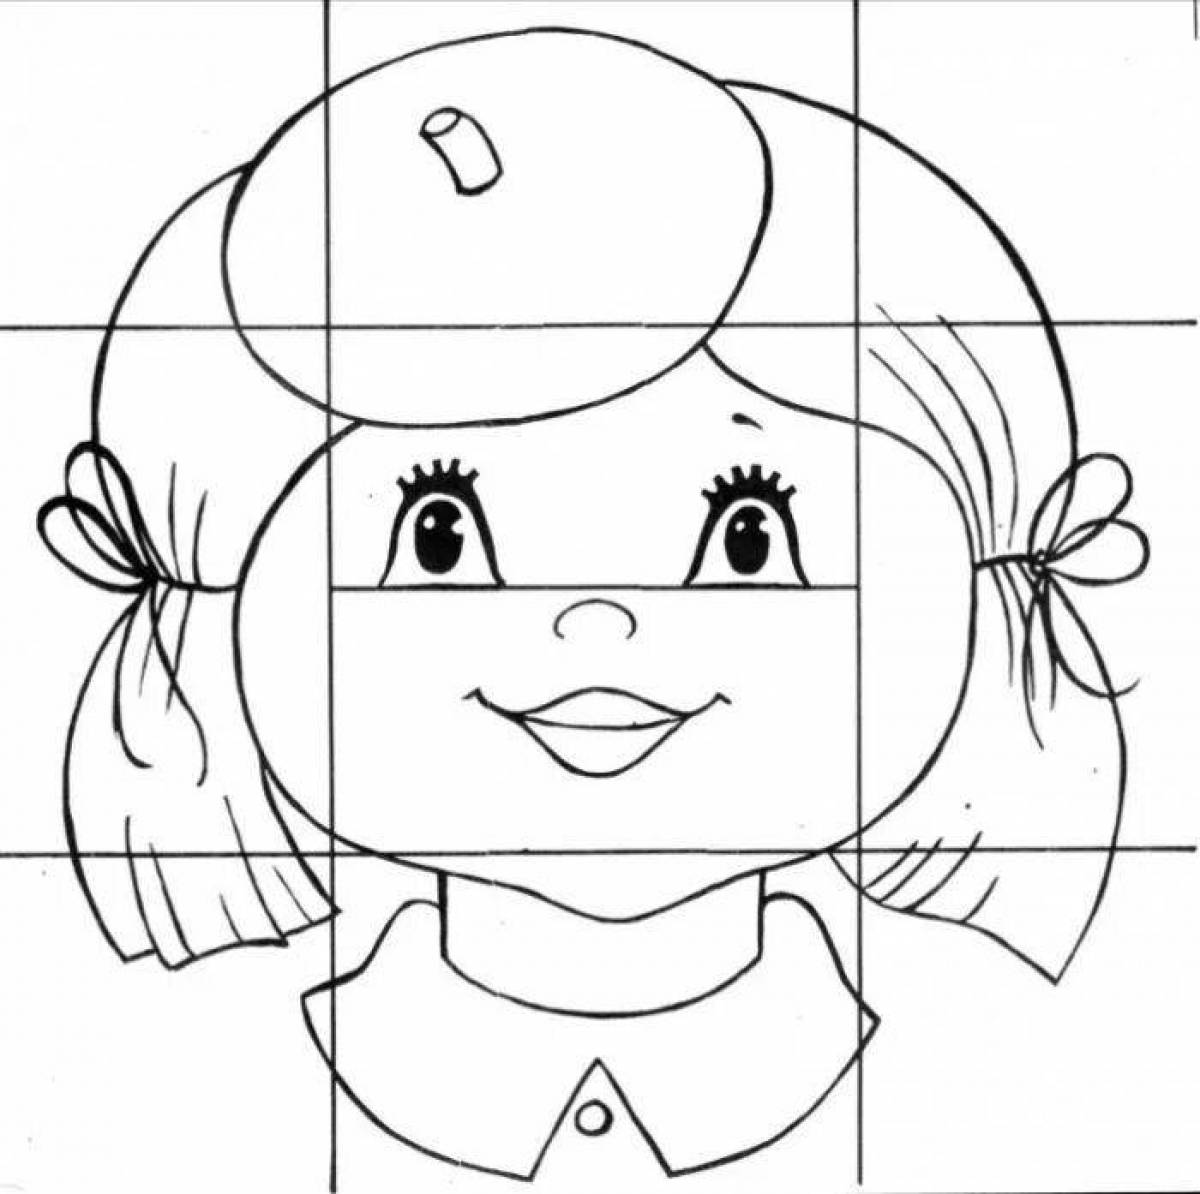 Human face for kids #5